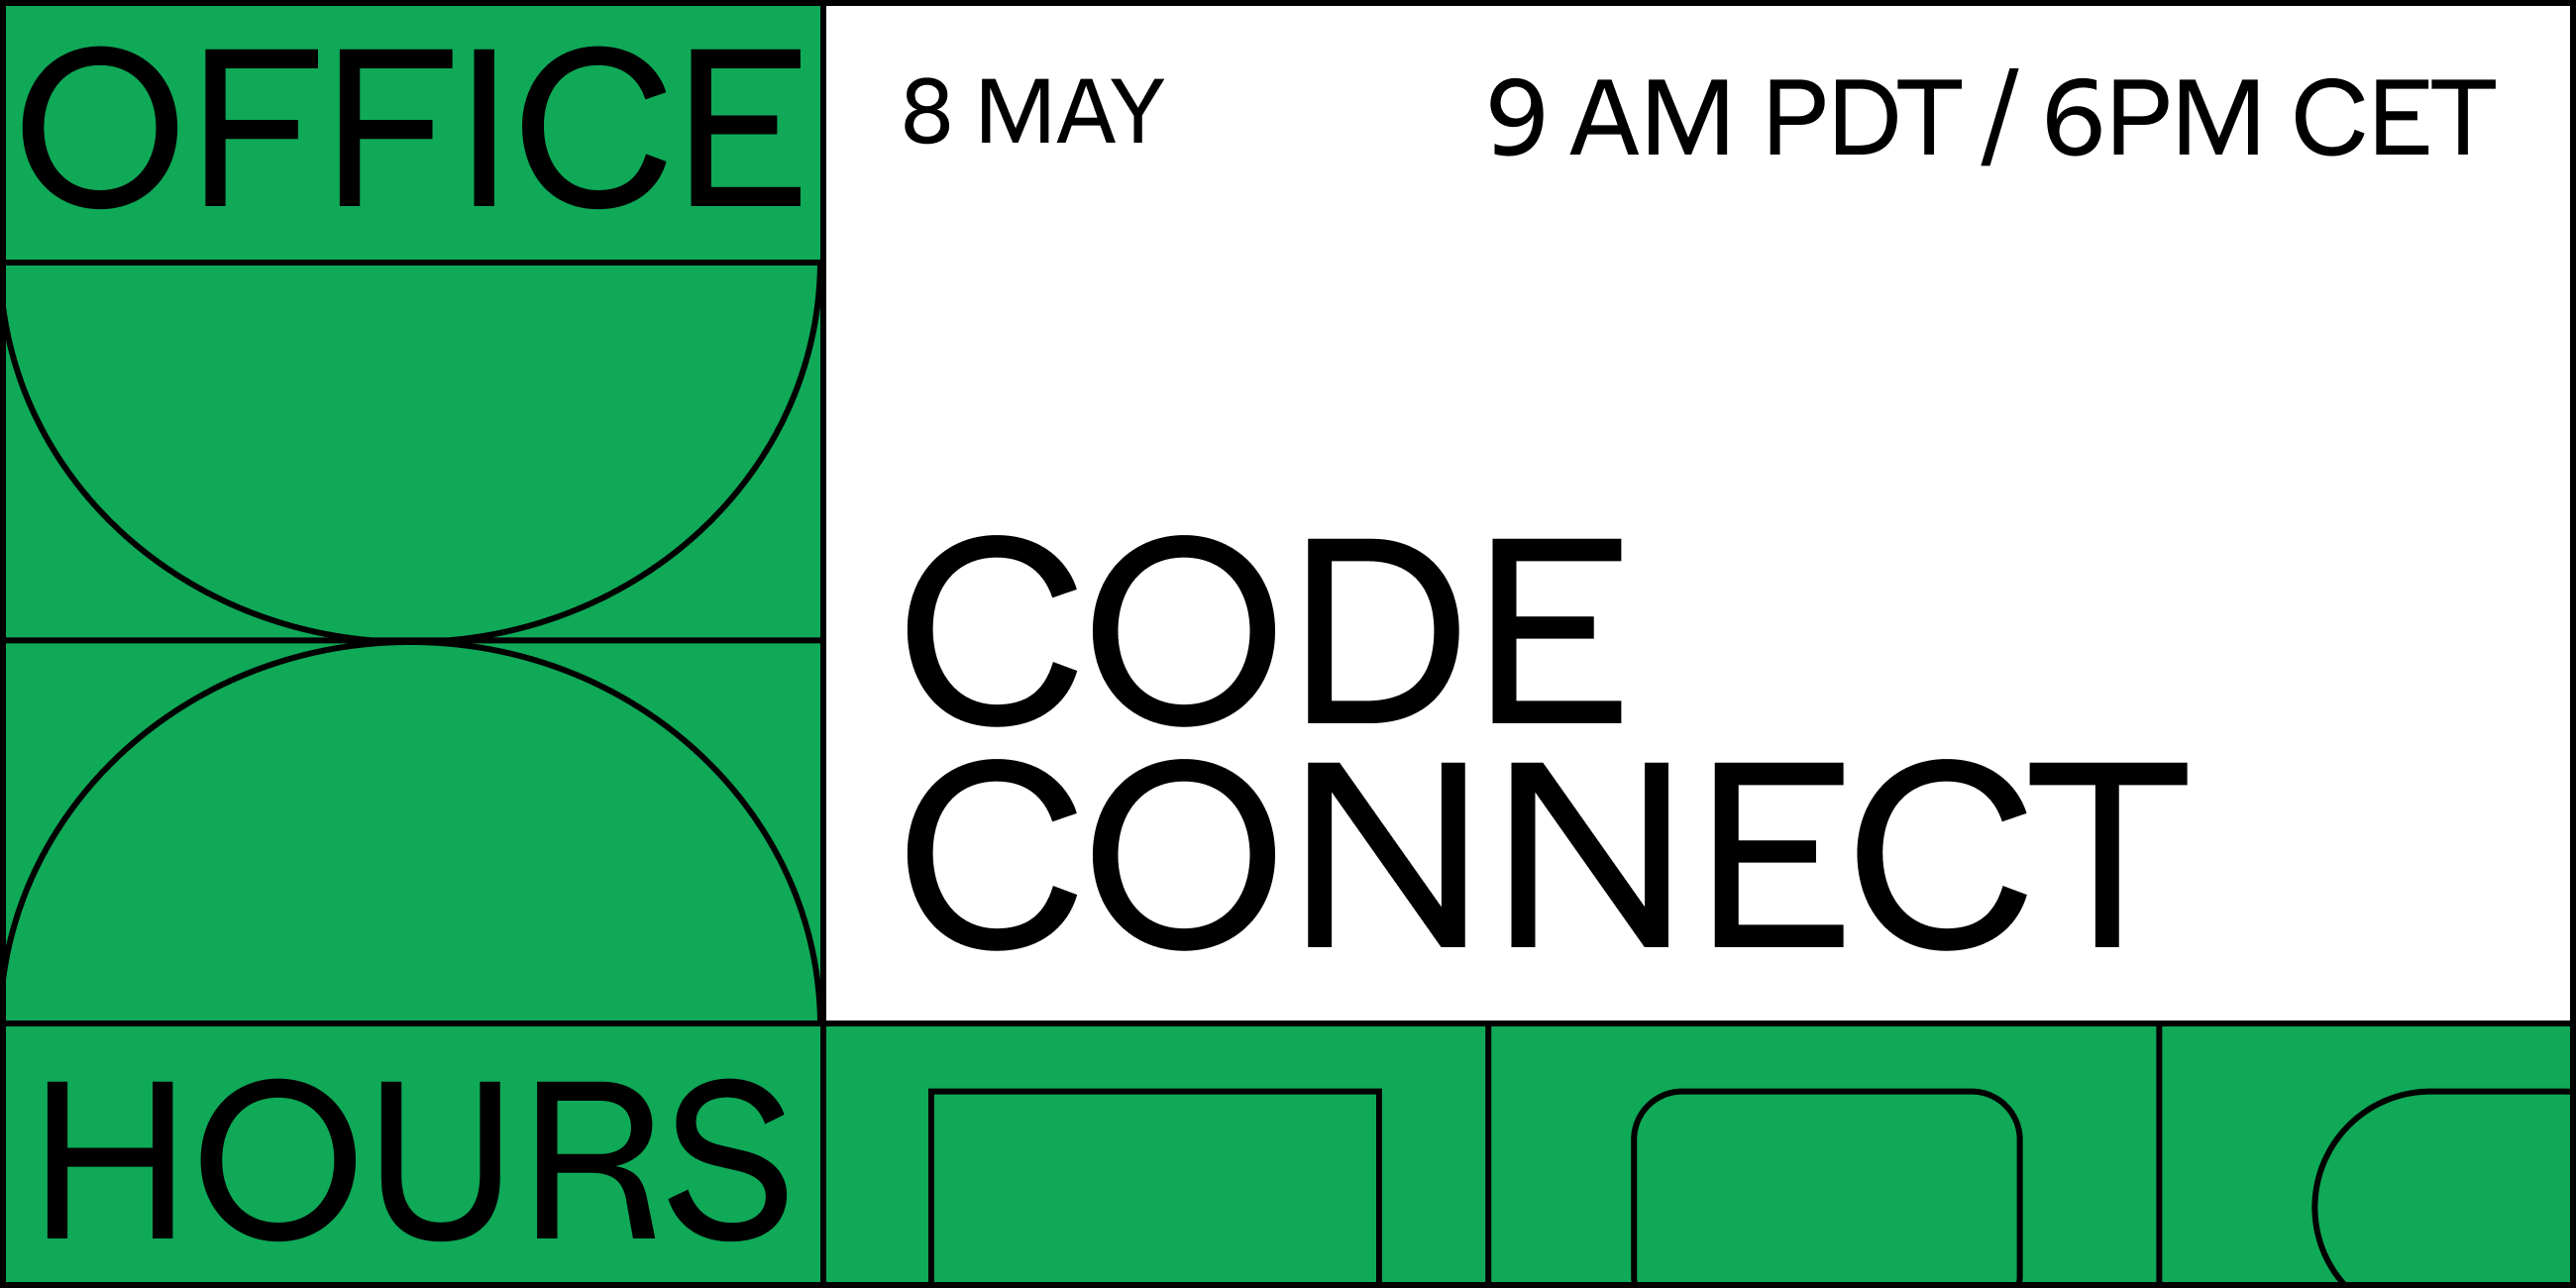 The image is a simple advertisement featuring the words "OFFICE CODE CONNECT HOURS" in bold, black letters against a white background with a green geometric design. It announces an event scheduled for "8 MAY at 9 AM PDT / 6 PM CET."